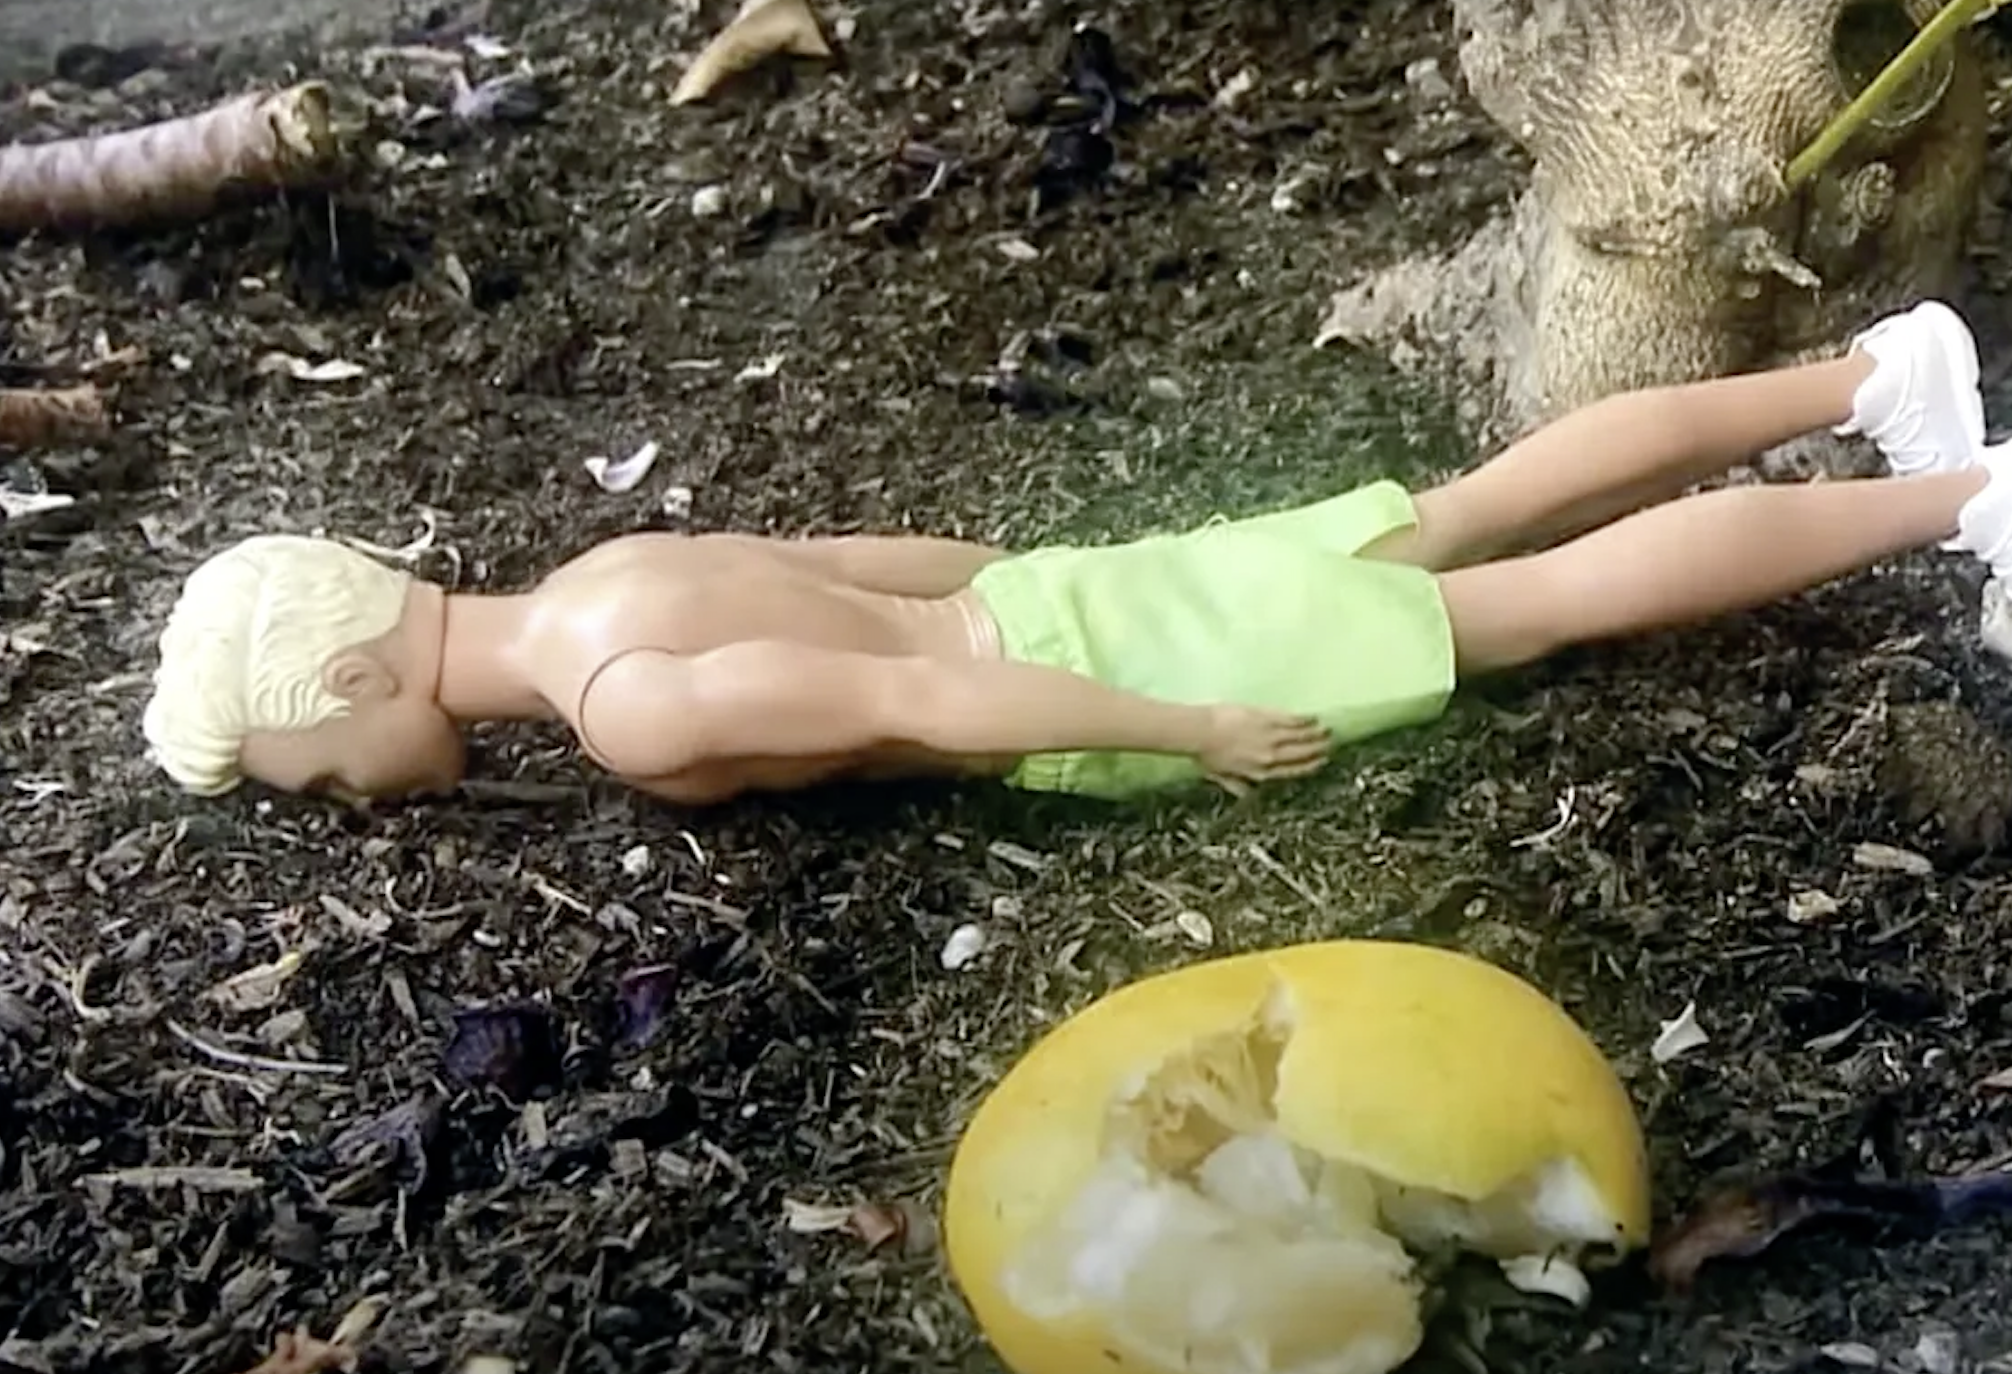 A Ken doll in the dirt